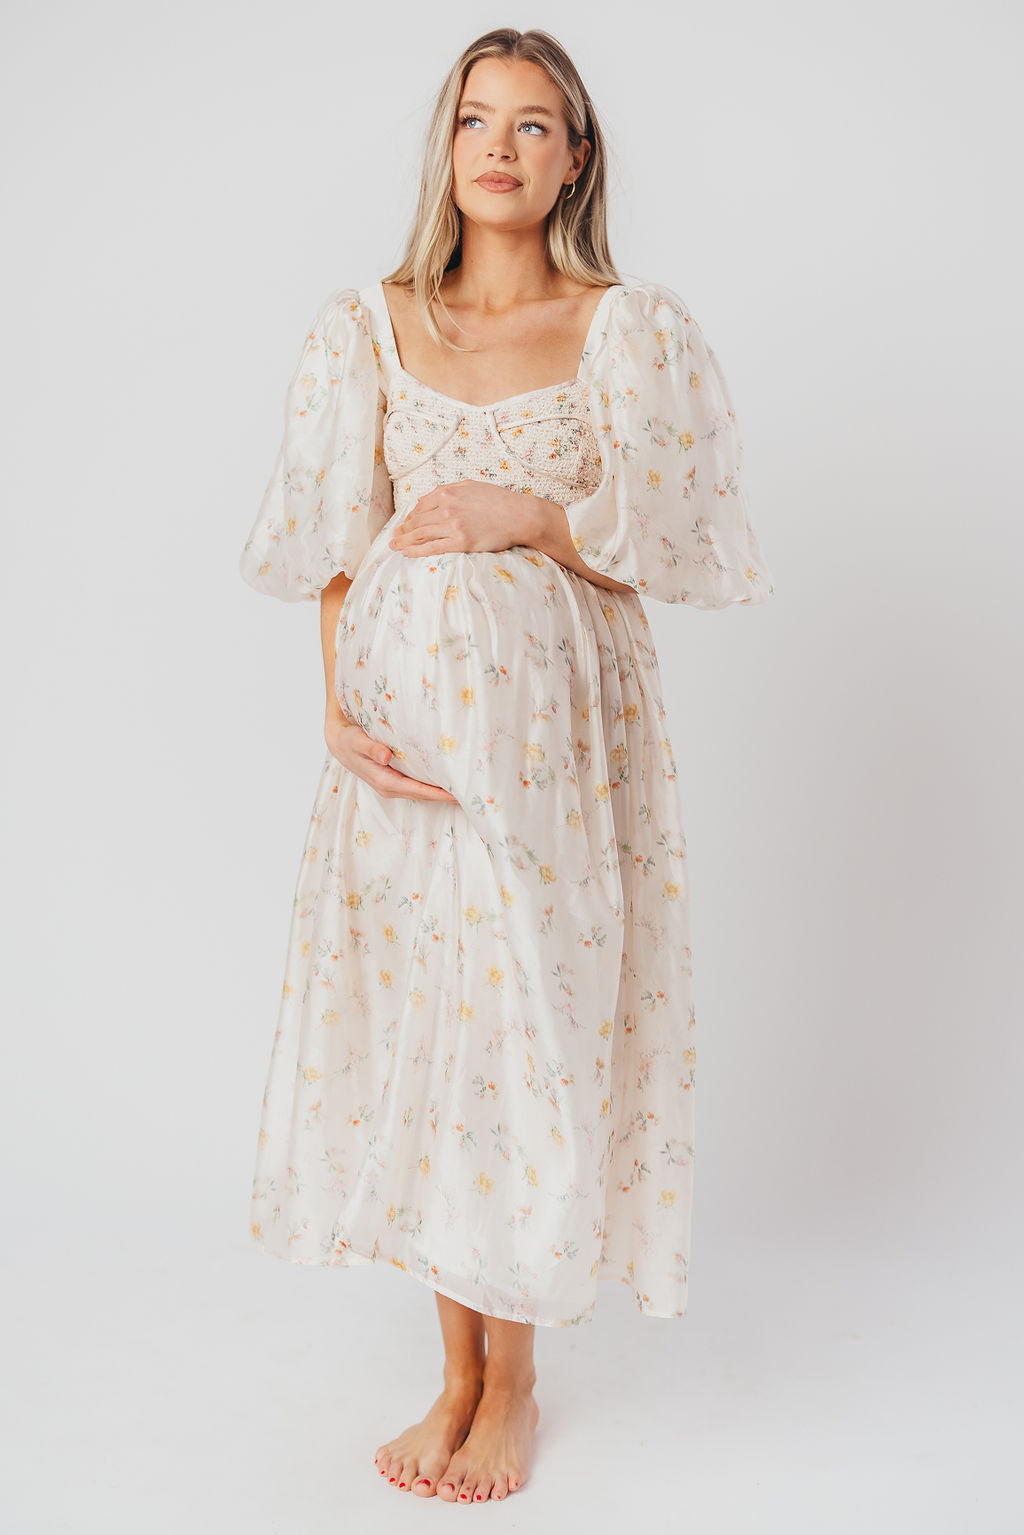 Harlow Maxi Dress in Tiny Yellow Floral - Bump Friendly & Inclusive Sizing (S-3XL)